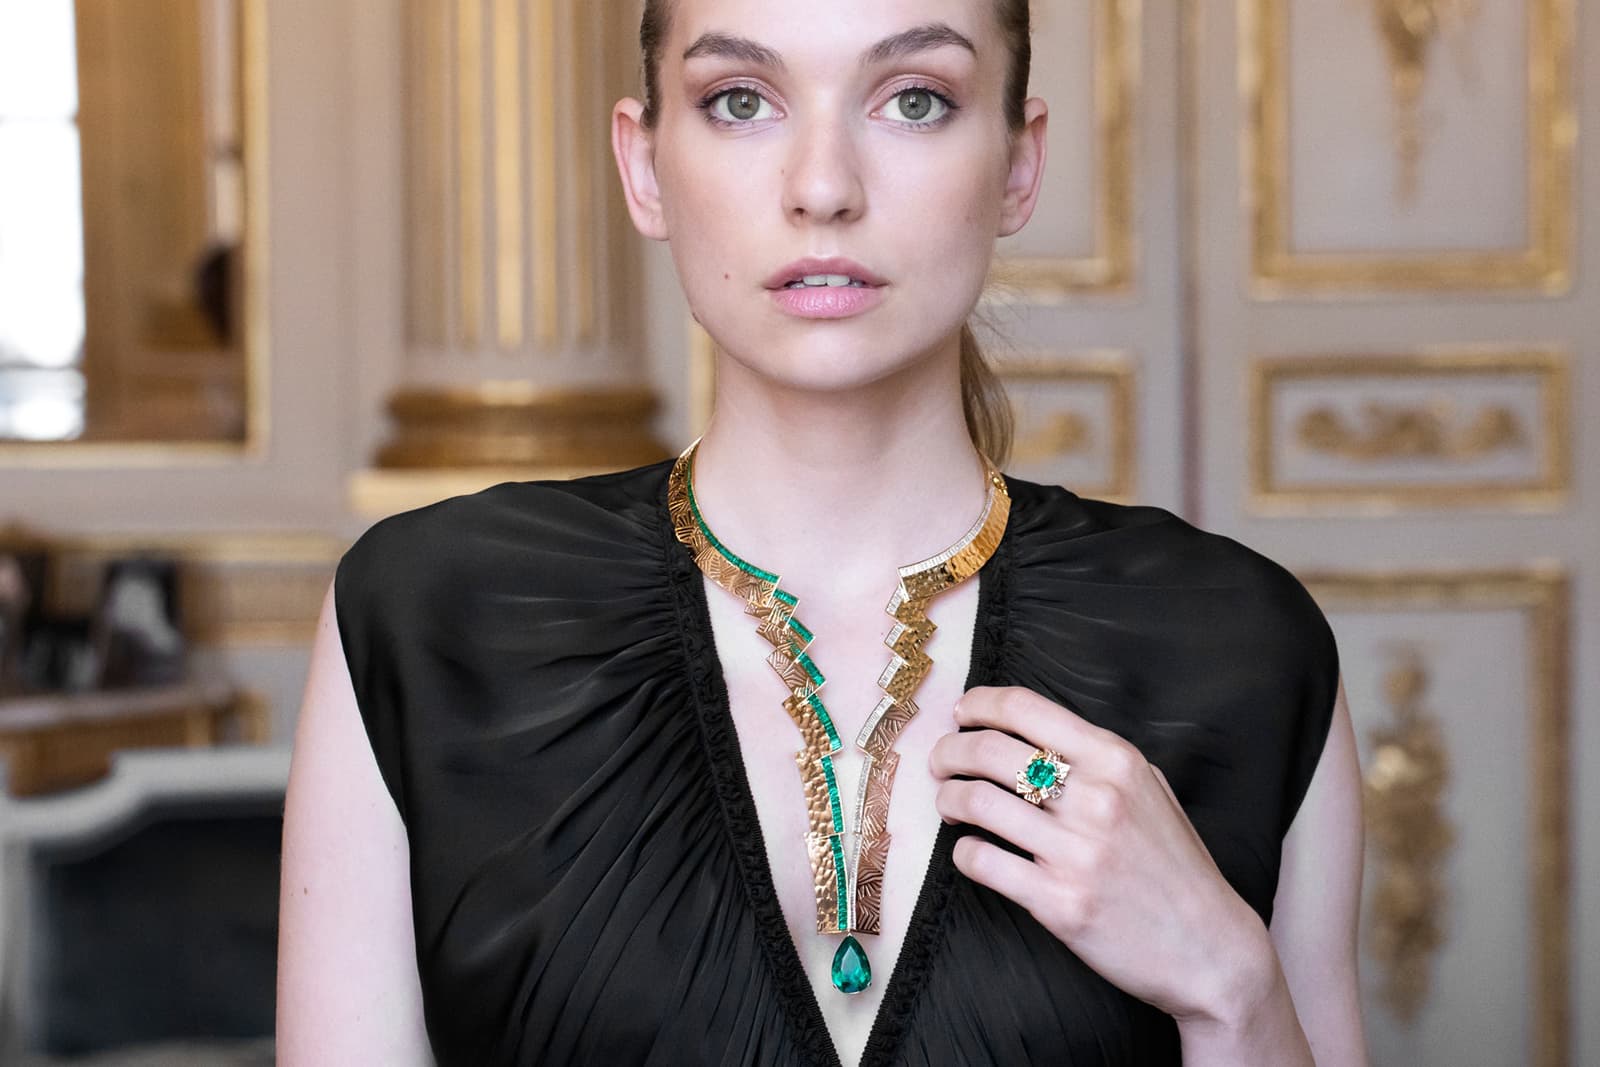 The new Chaumet Perspectives Skyline high jewellery necklace is thrillingly contemporary